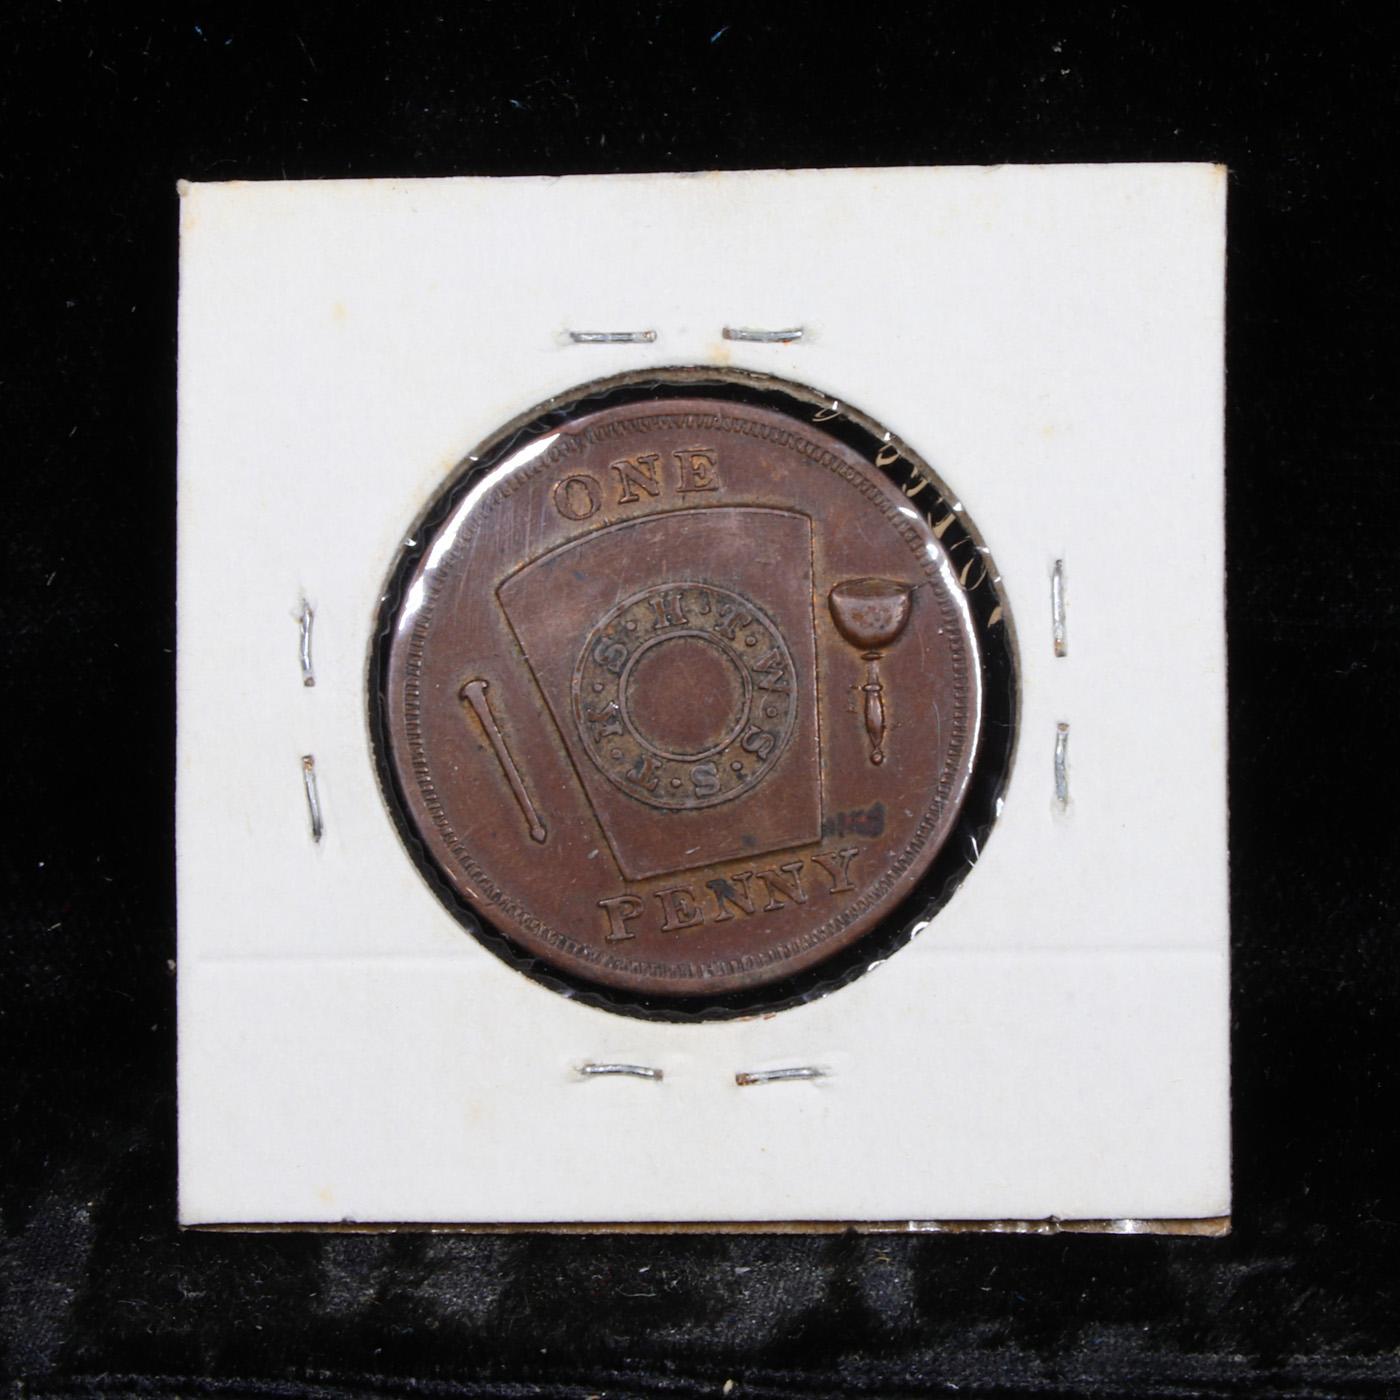 Lot #2 of the 450 Masonic Tokens from The Walter O. Collection